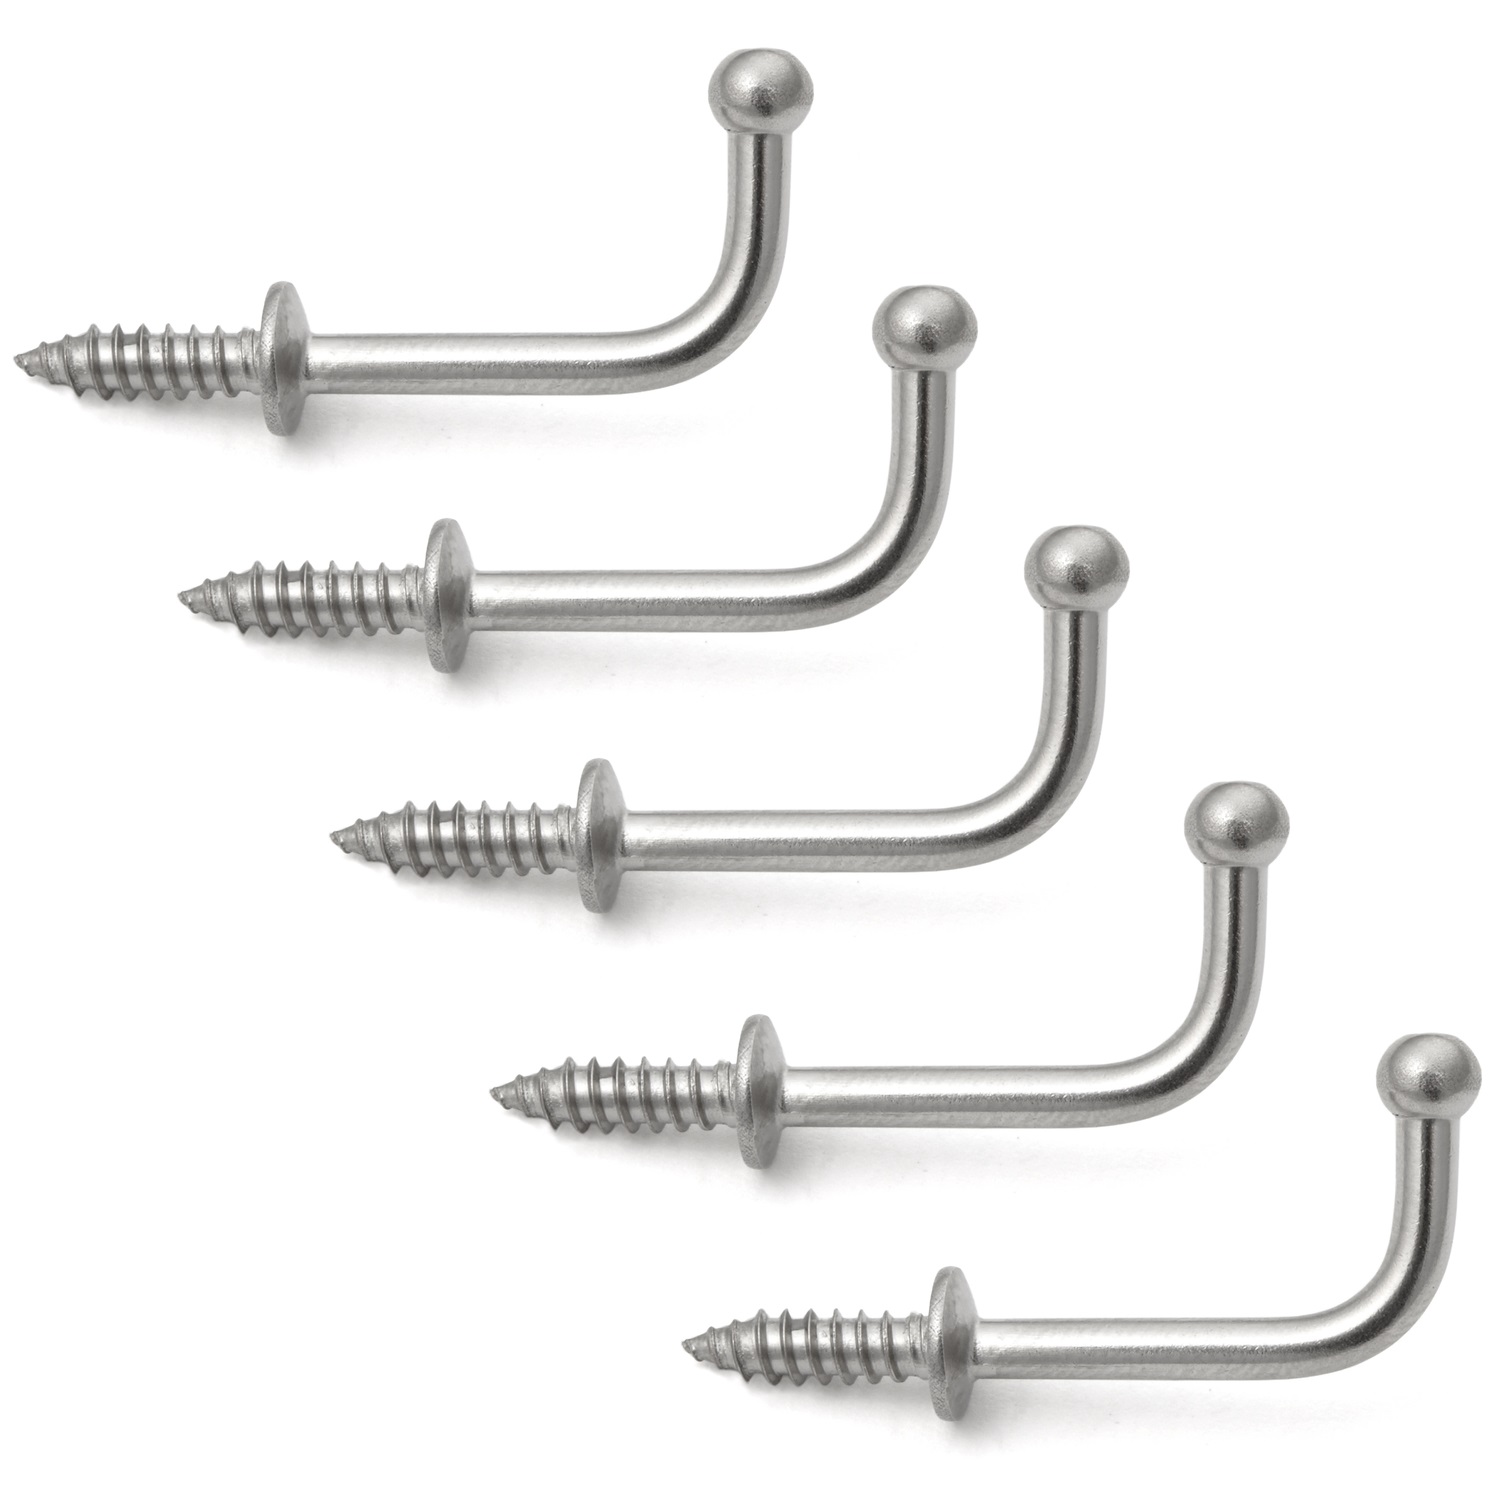 5 pcs high quality stainless steel screw hooks with rounded tip. stainless  steel hook TY by Sugatsune / Lamp (Japan)